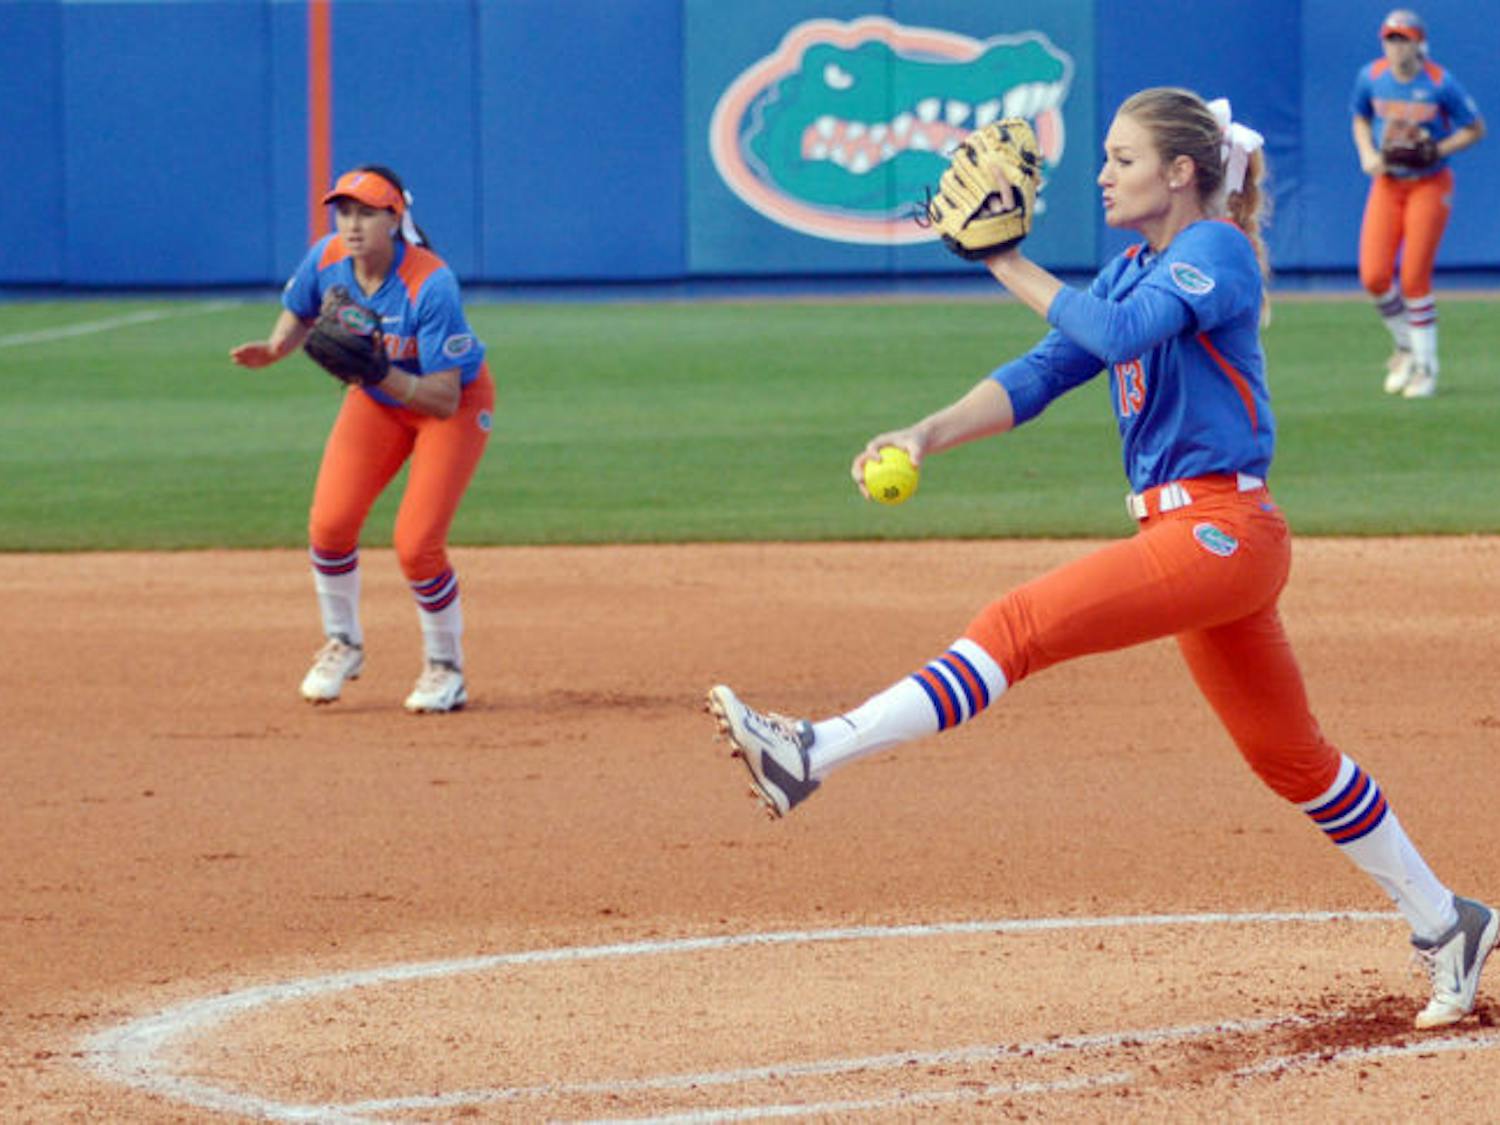 Hannah Rogers pitches during Florida’s 8-0 win against Indiana on Feb. 21 at Katie Seashole Pressly Stadium.